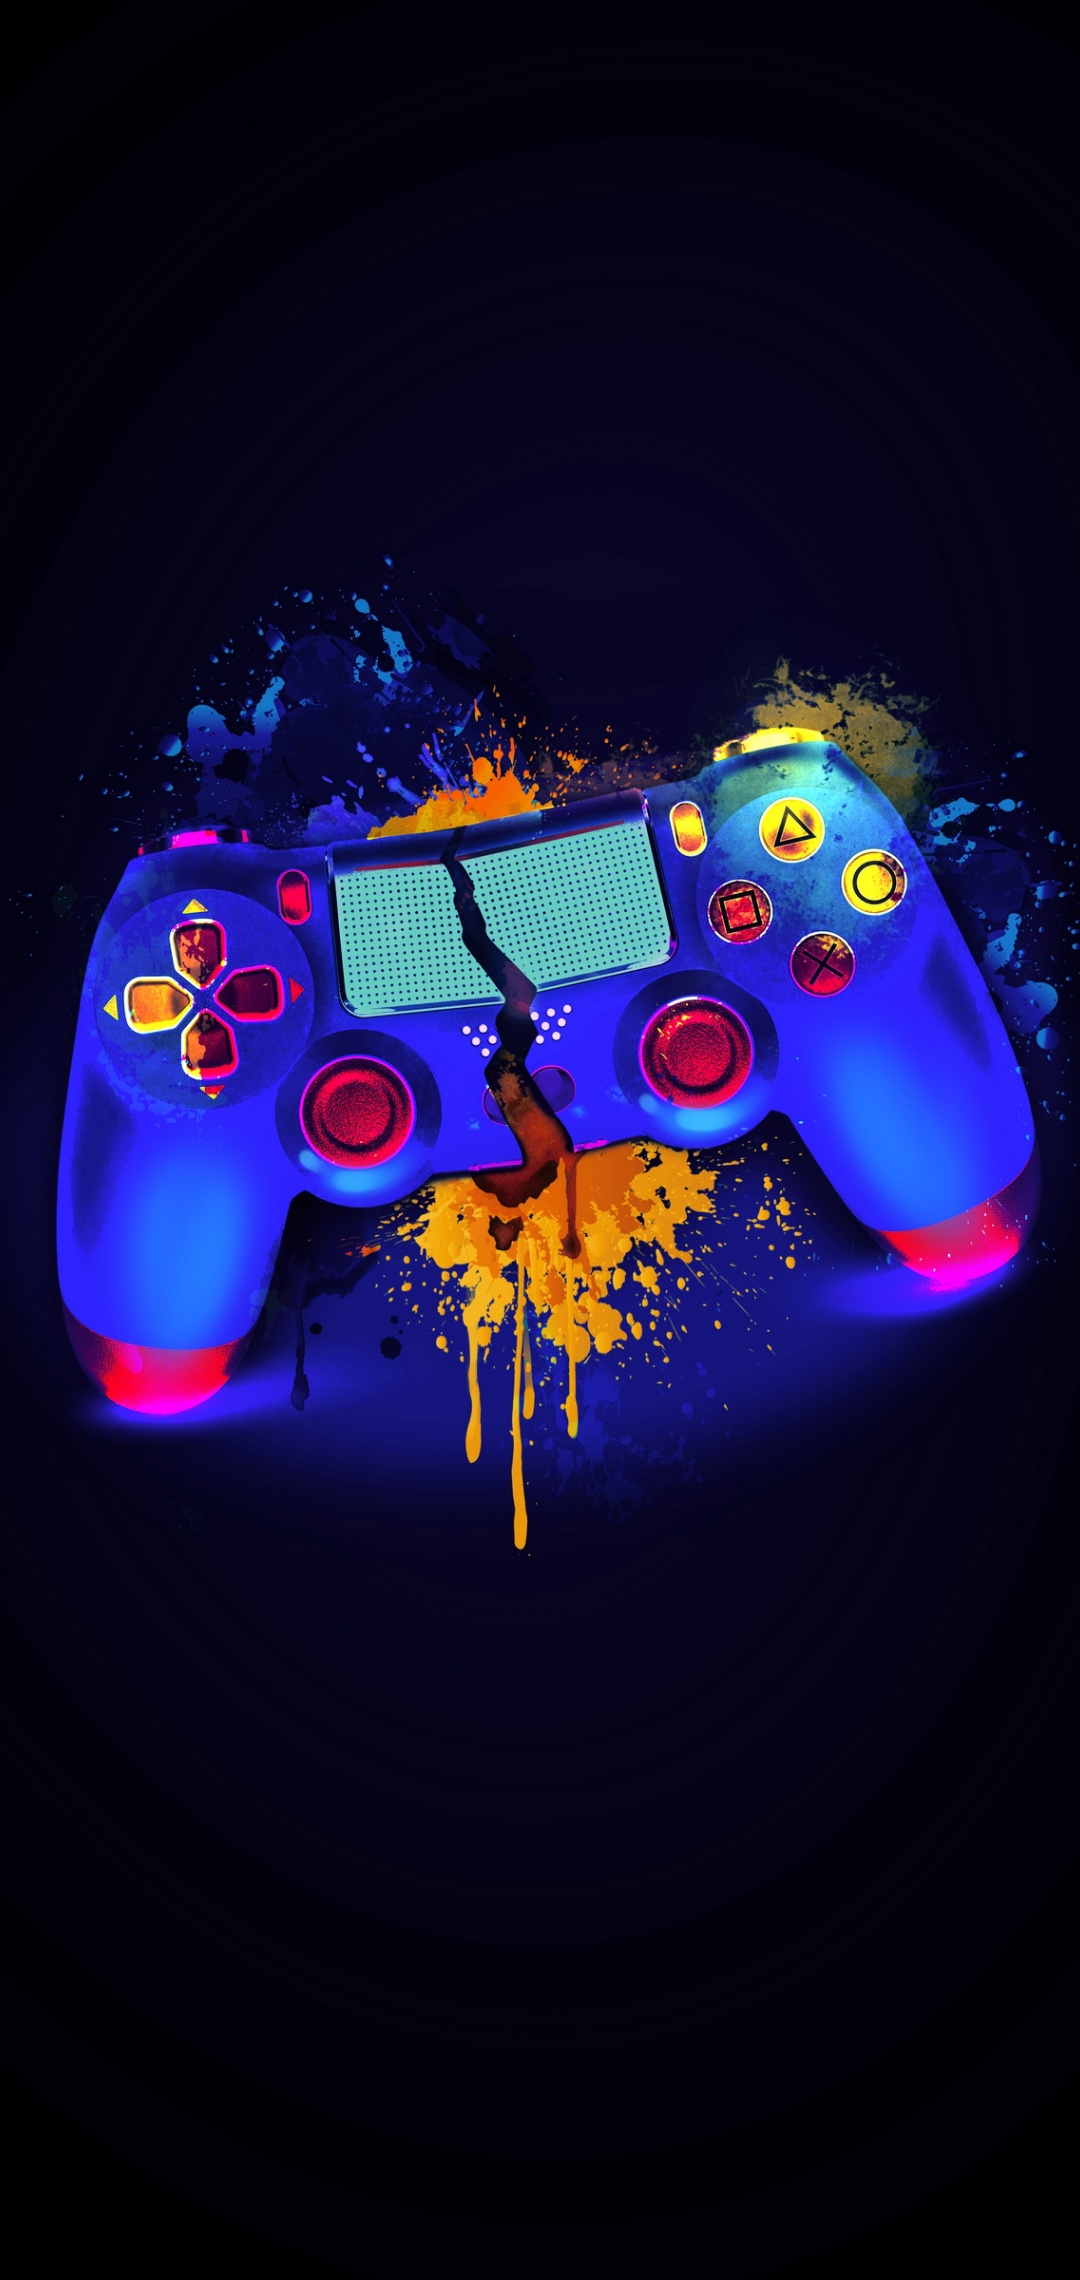 Video Game Control 4k Ultra HD Wallpaper by Tommyboy42